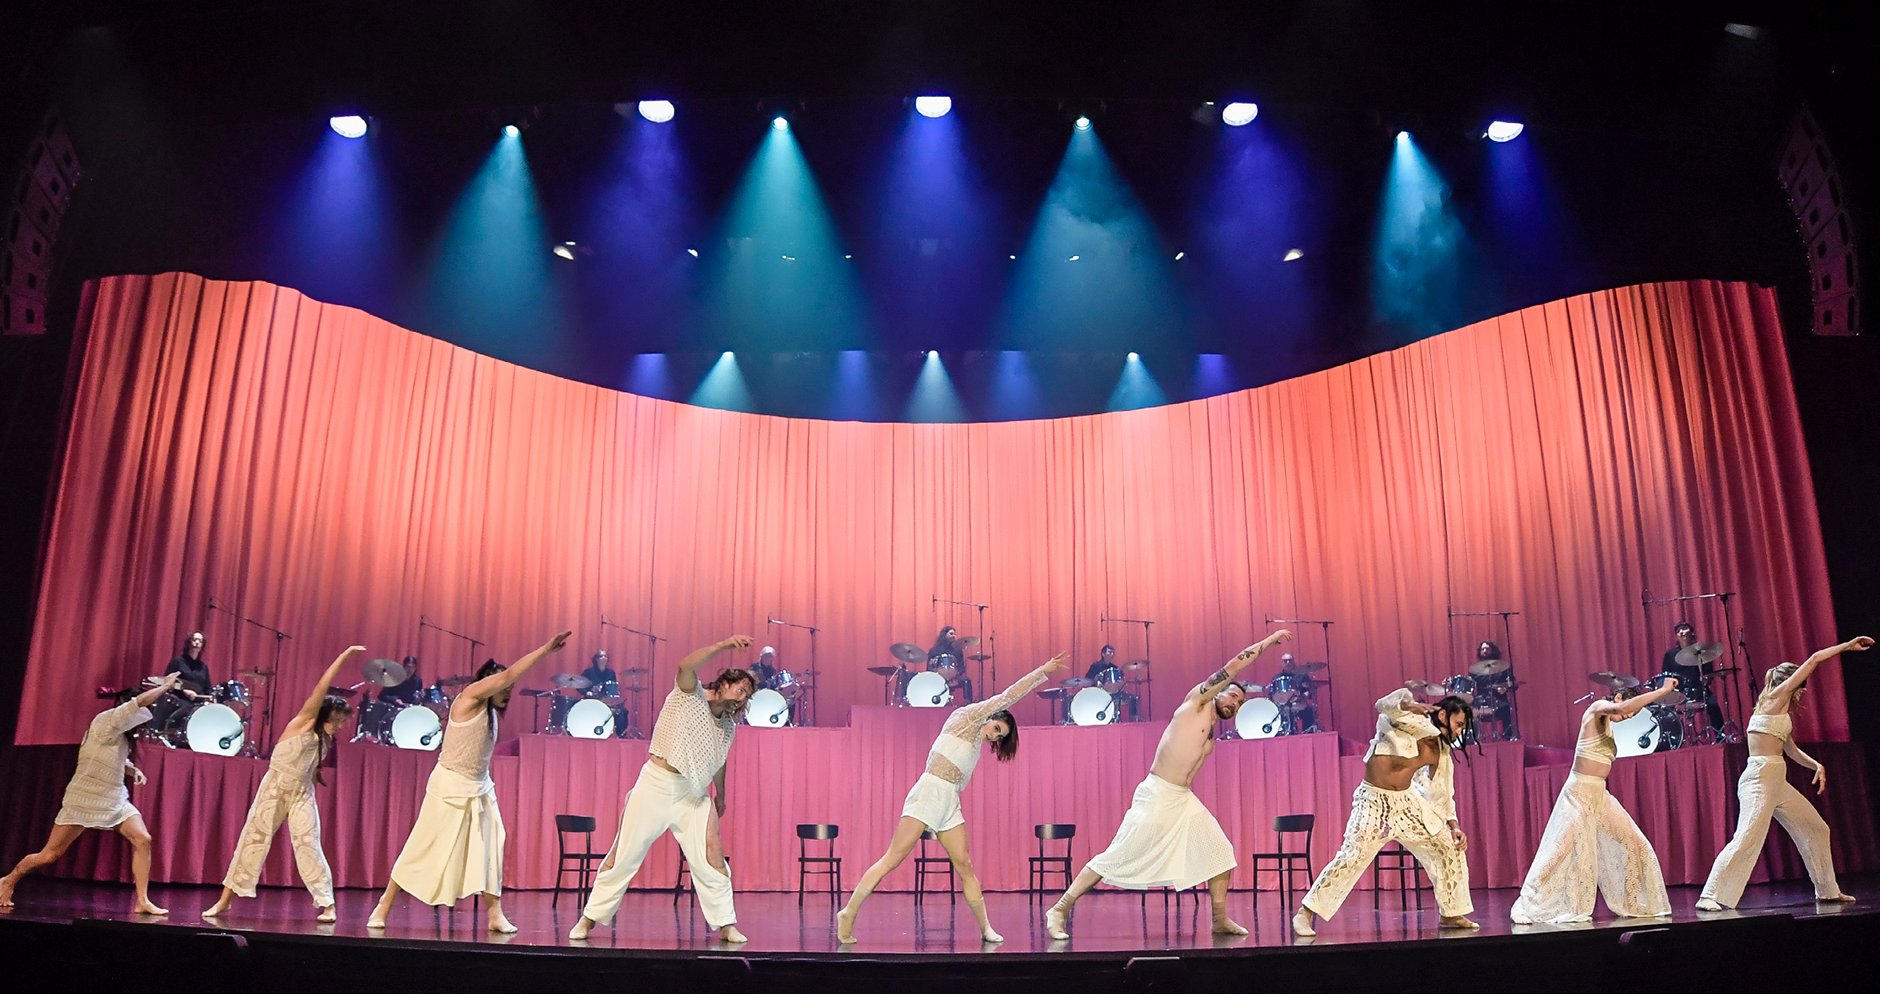 Manifesto at Adelaide Festival 2022. Nine dancers on stage wearing all white outfits